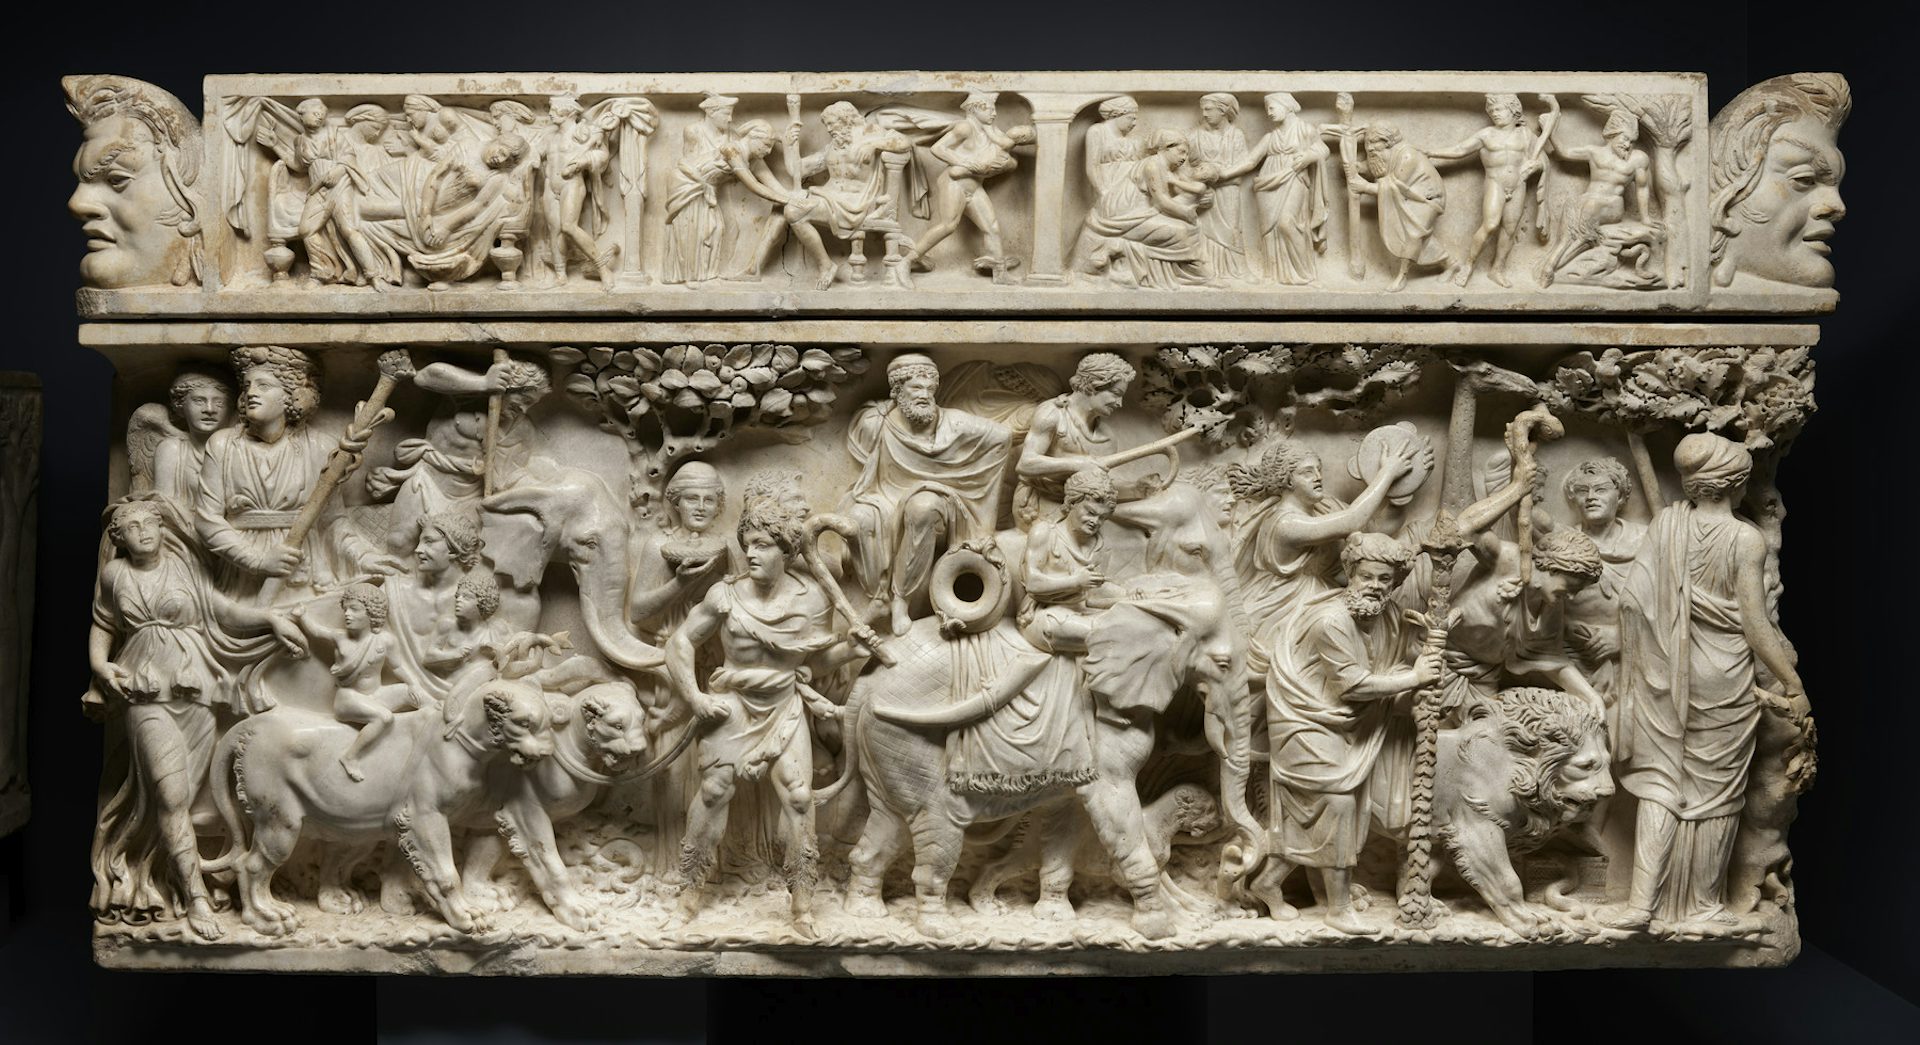 Sarcophagus of the triumph of Dionysus